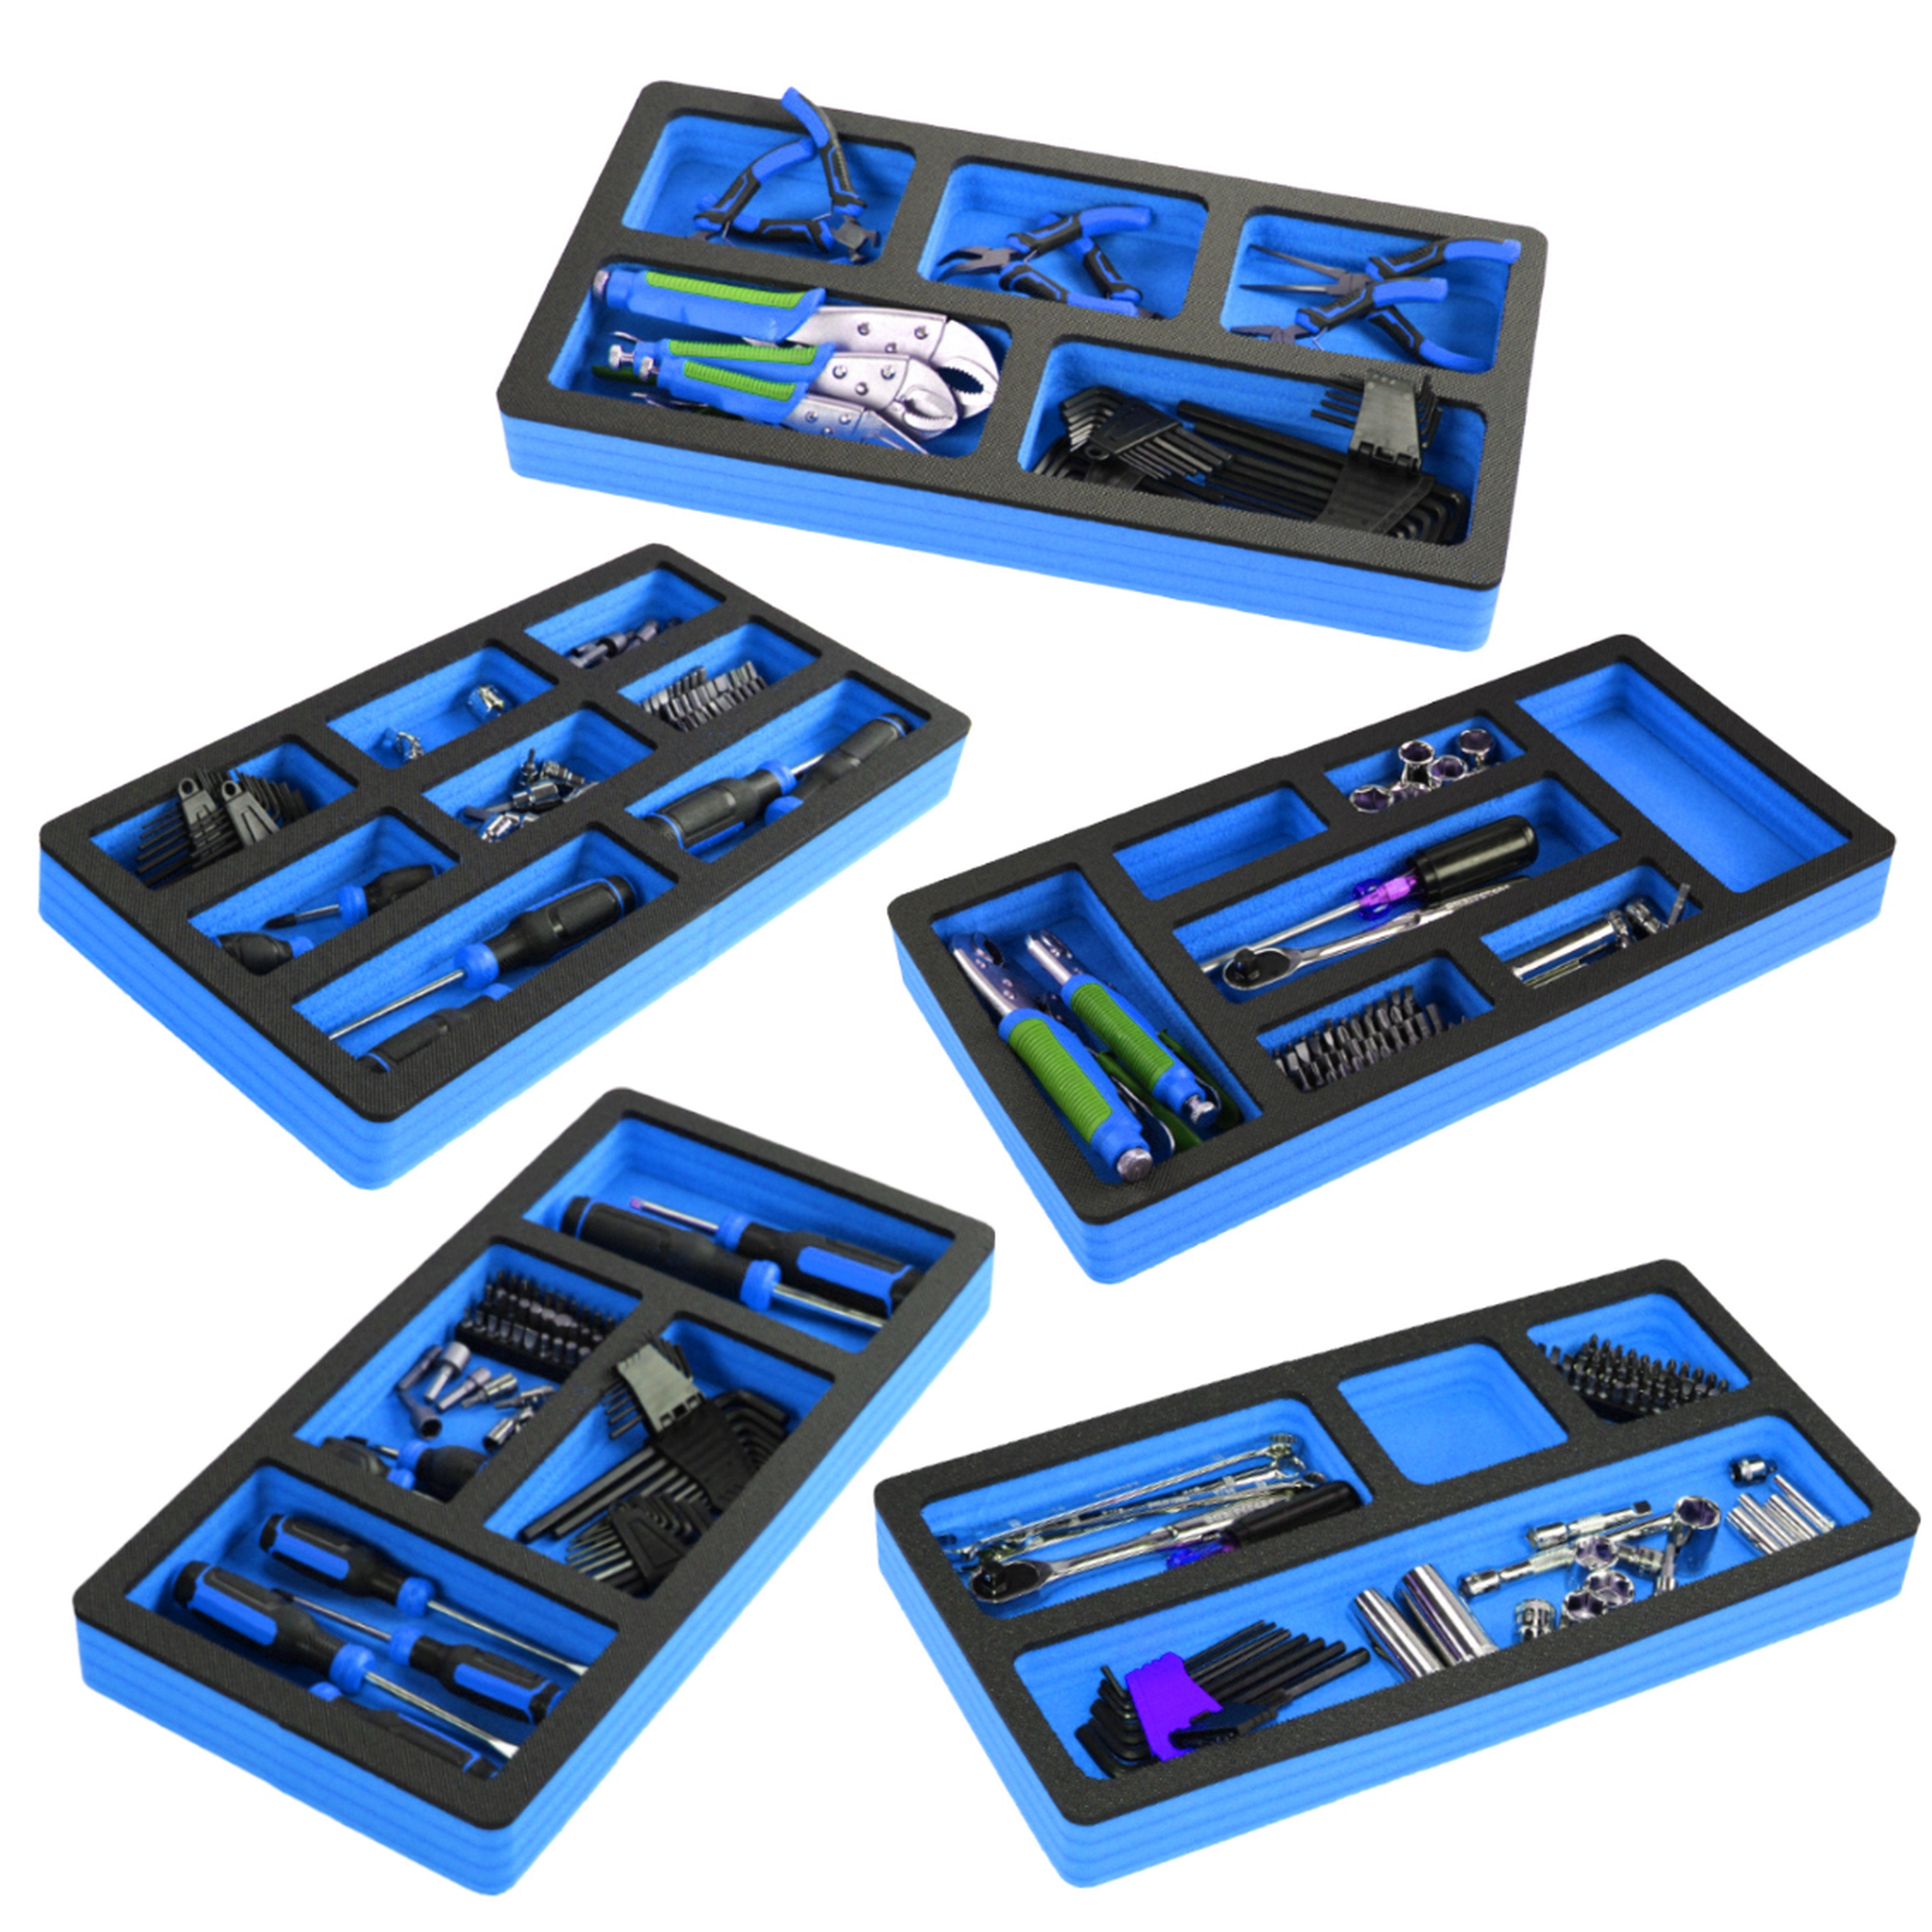 Tool Drawer Organizer 5-Piece Insert Set Blue and Black Durable Foam Non-Slip Anti-Rattle Bin Holder Tray 20 x 10 Inches Large Pockets Fits Craftsman Husky Kobalt Milwaukee and Many Others